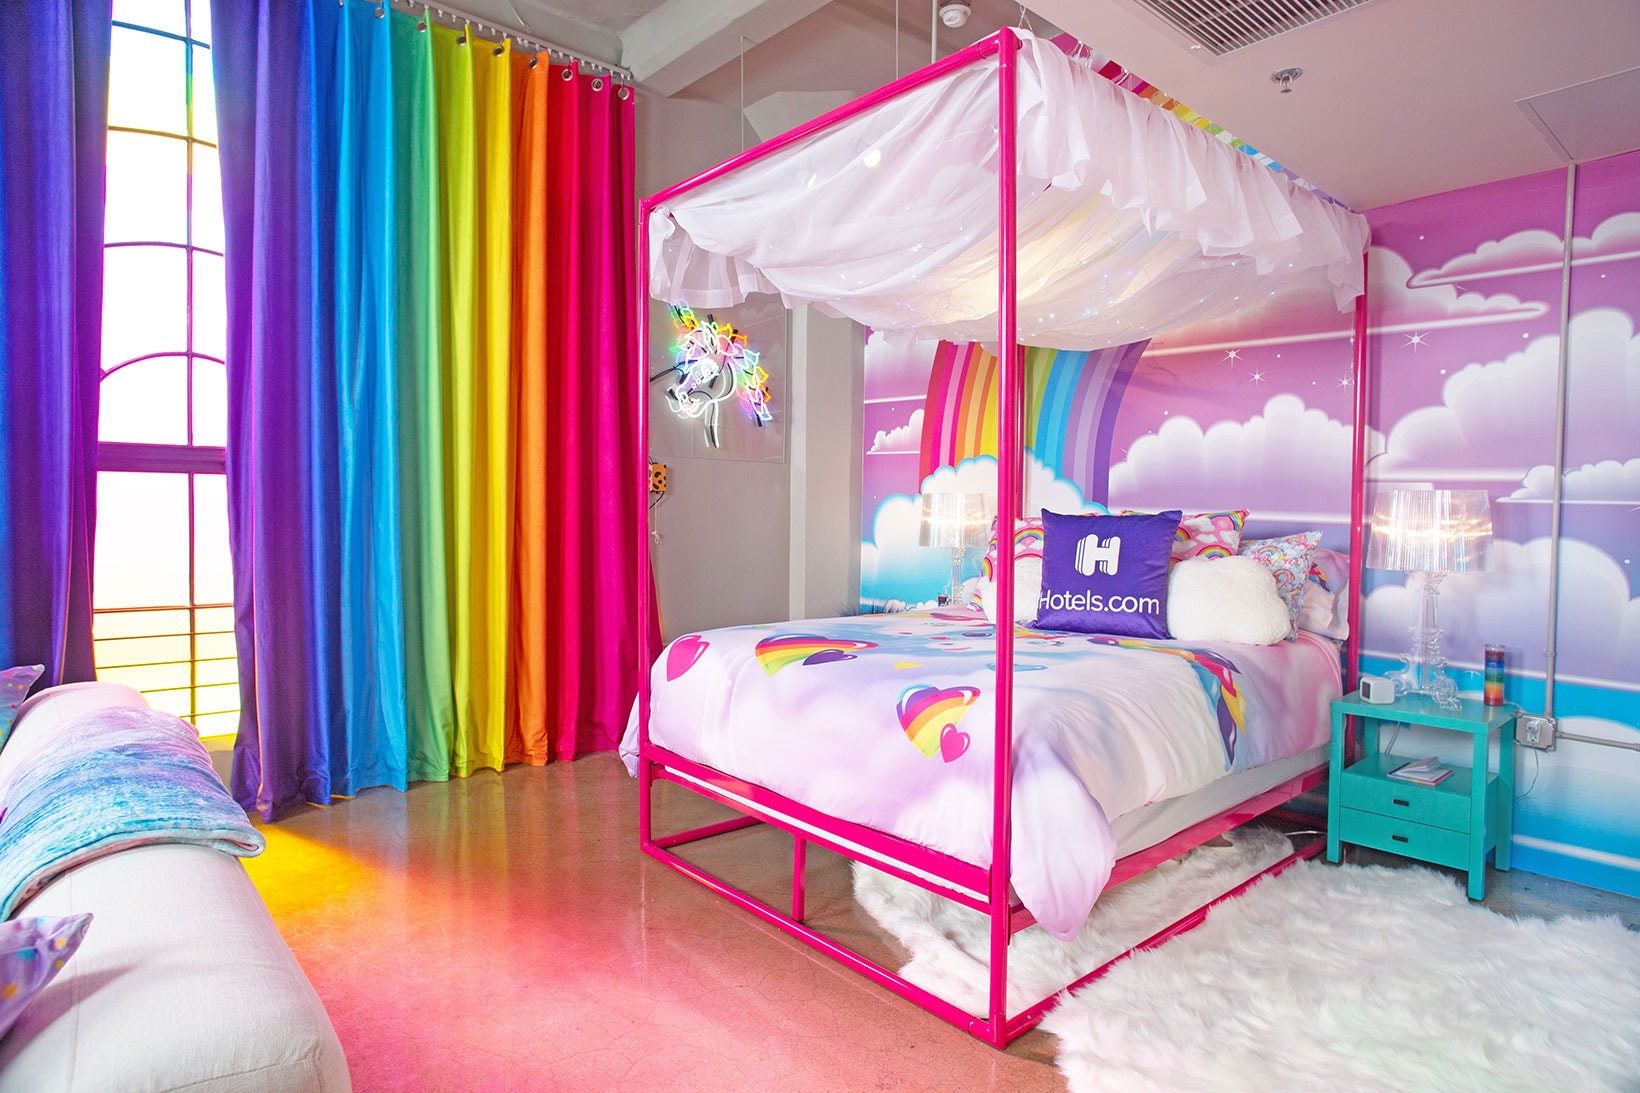 lisa frank hotels com apartment flat room stuff toys furniture couch table lamp rainbow 